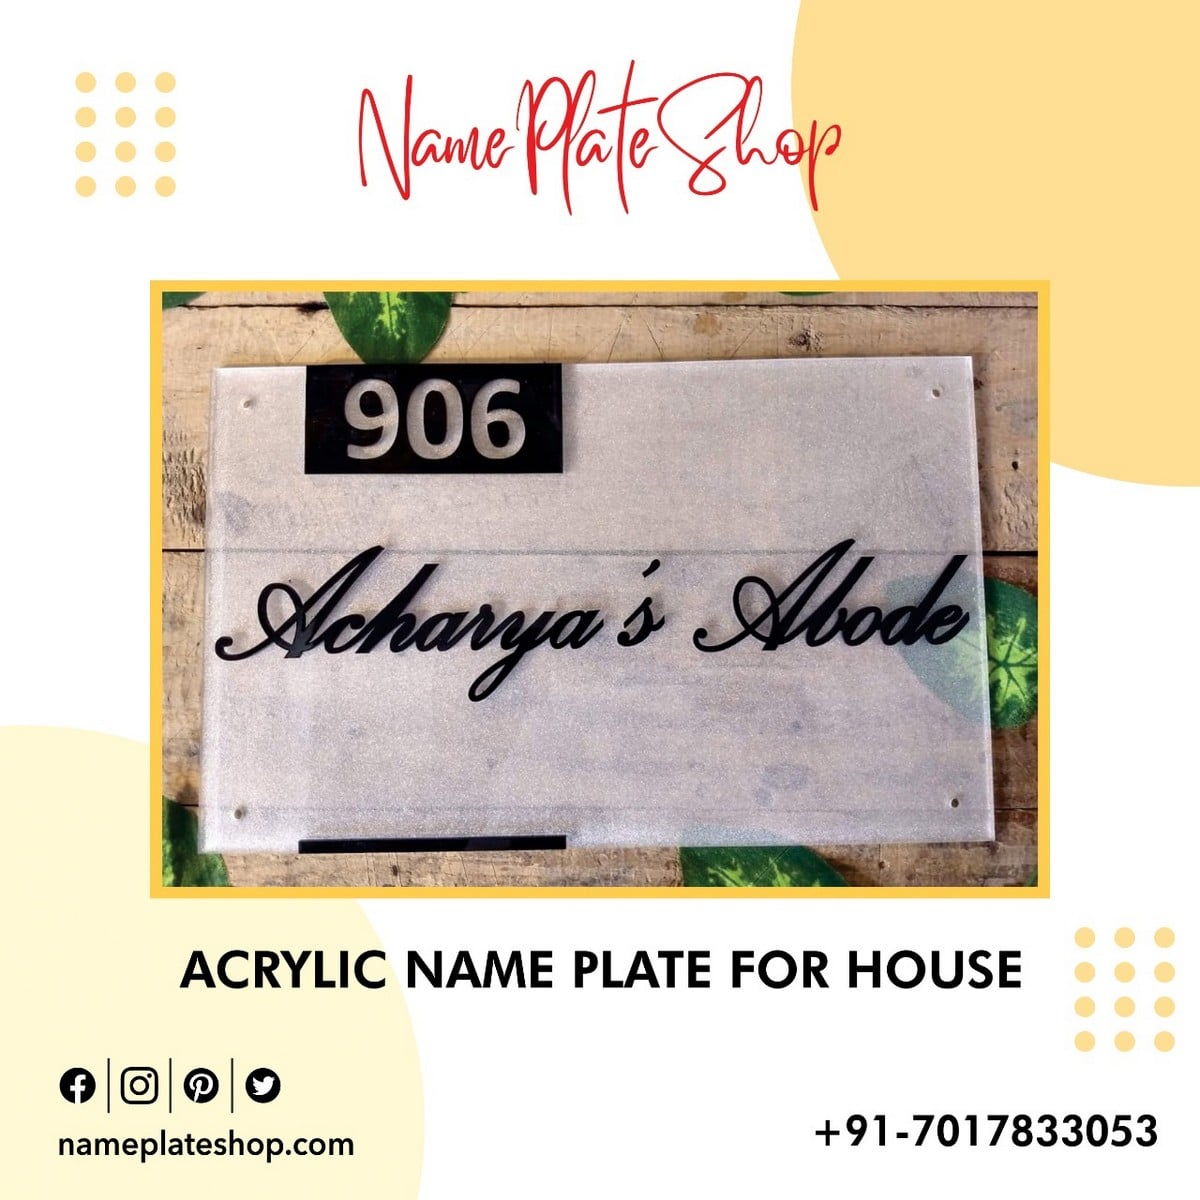 Acrylic Nameplate for House